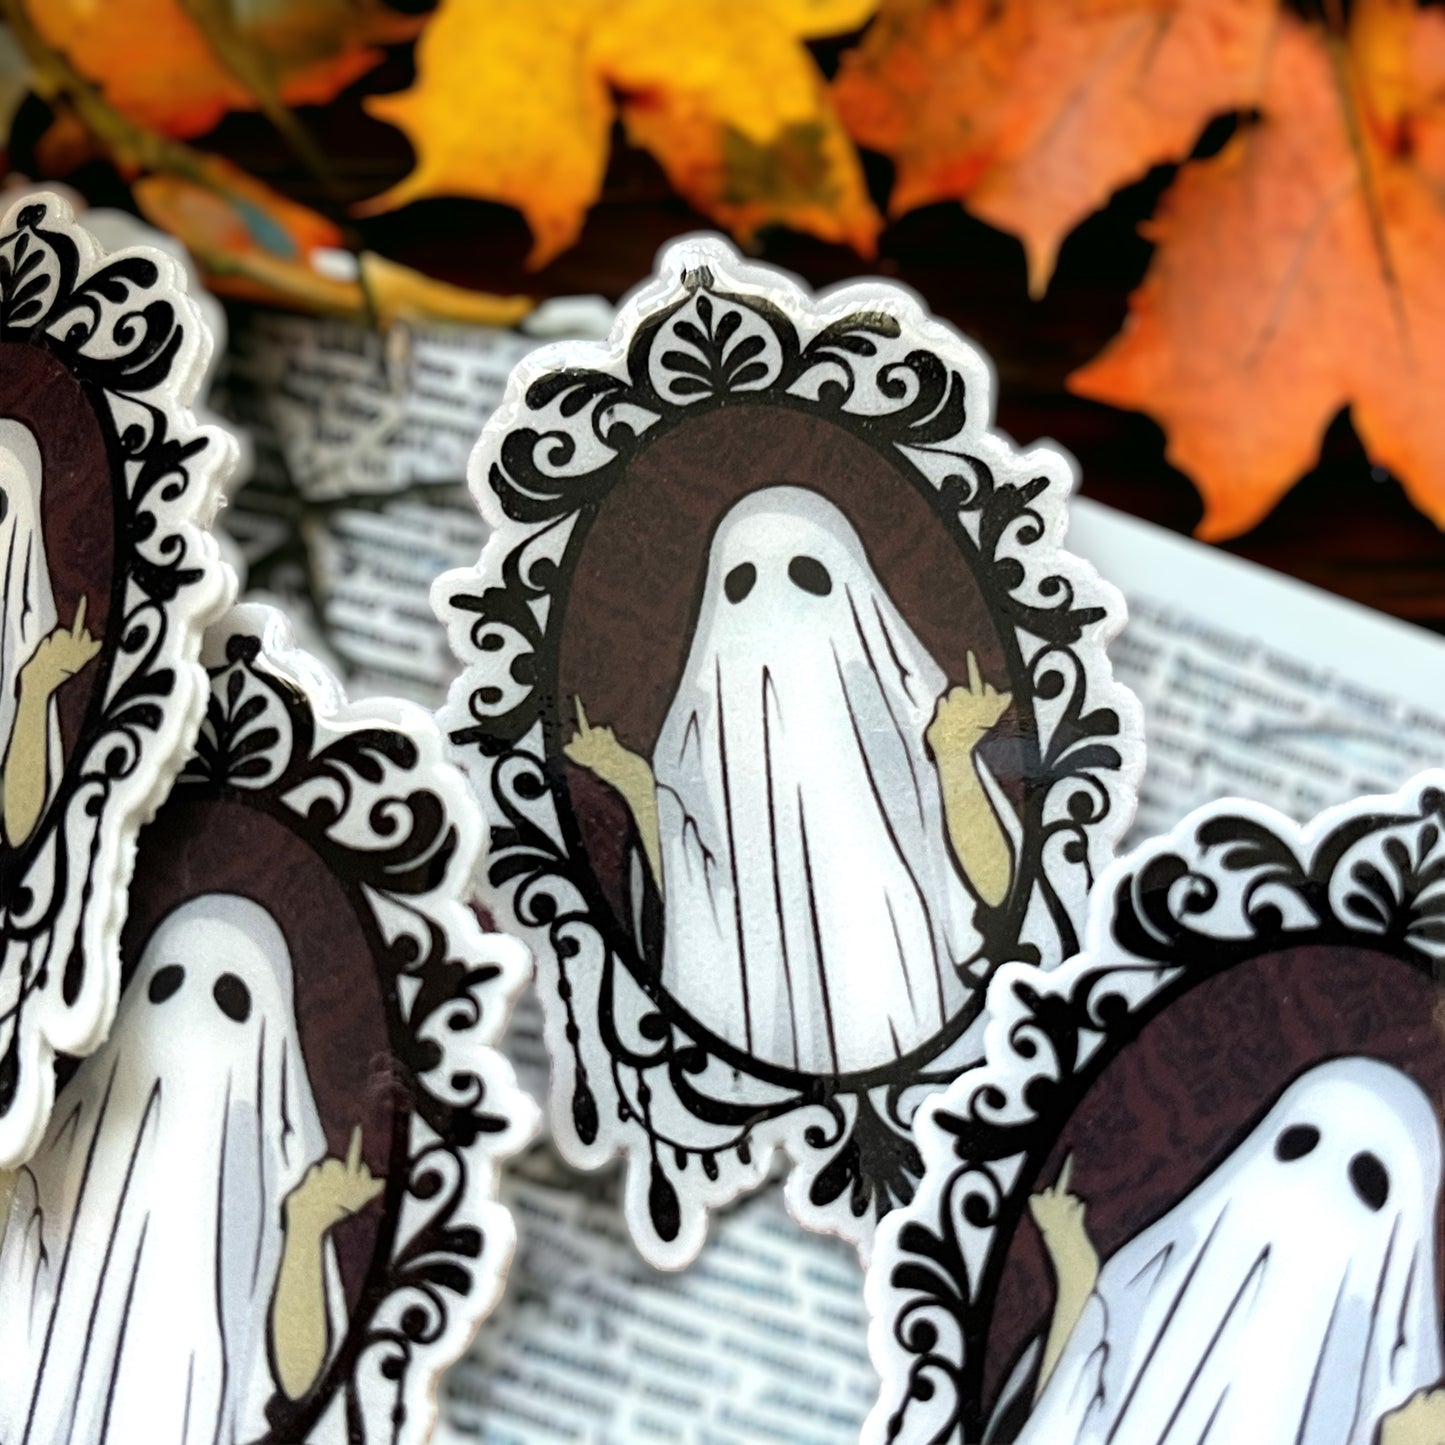 Handmade "F You" Ghostly Humor Vintage Gothic Halloween Pin